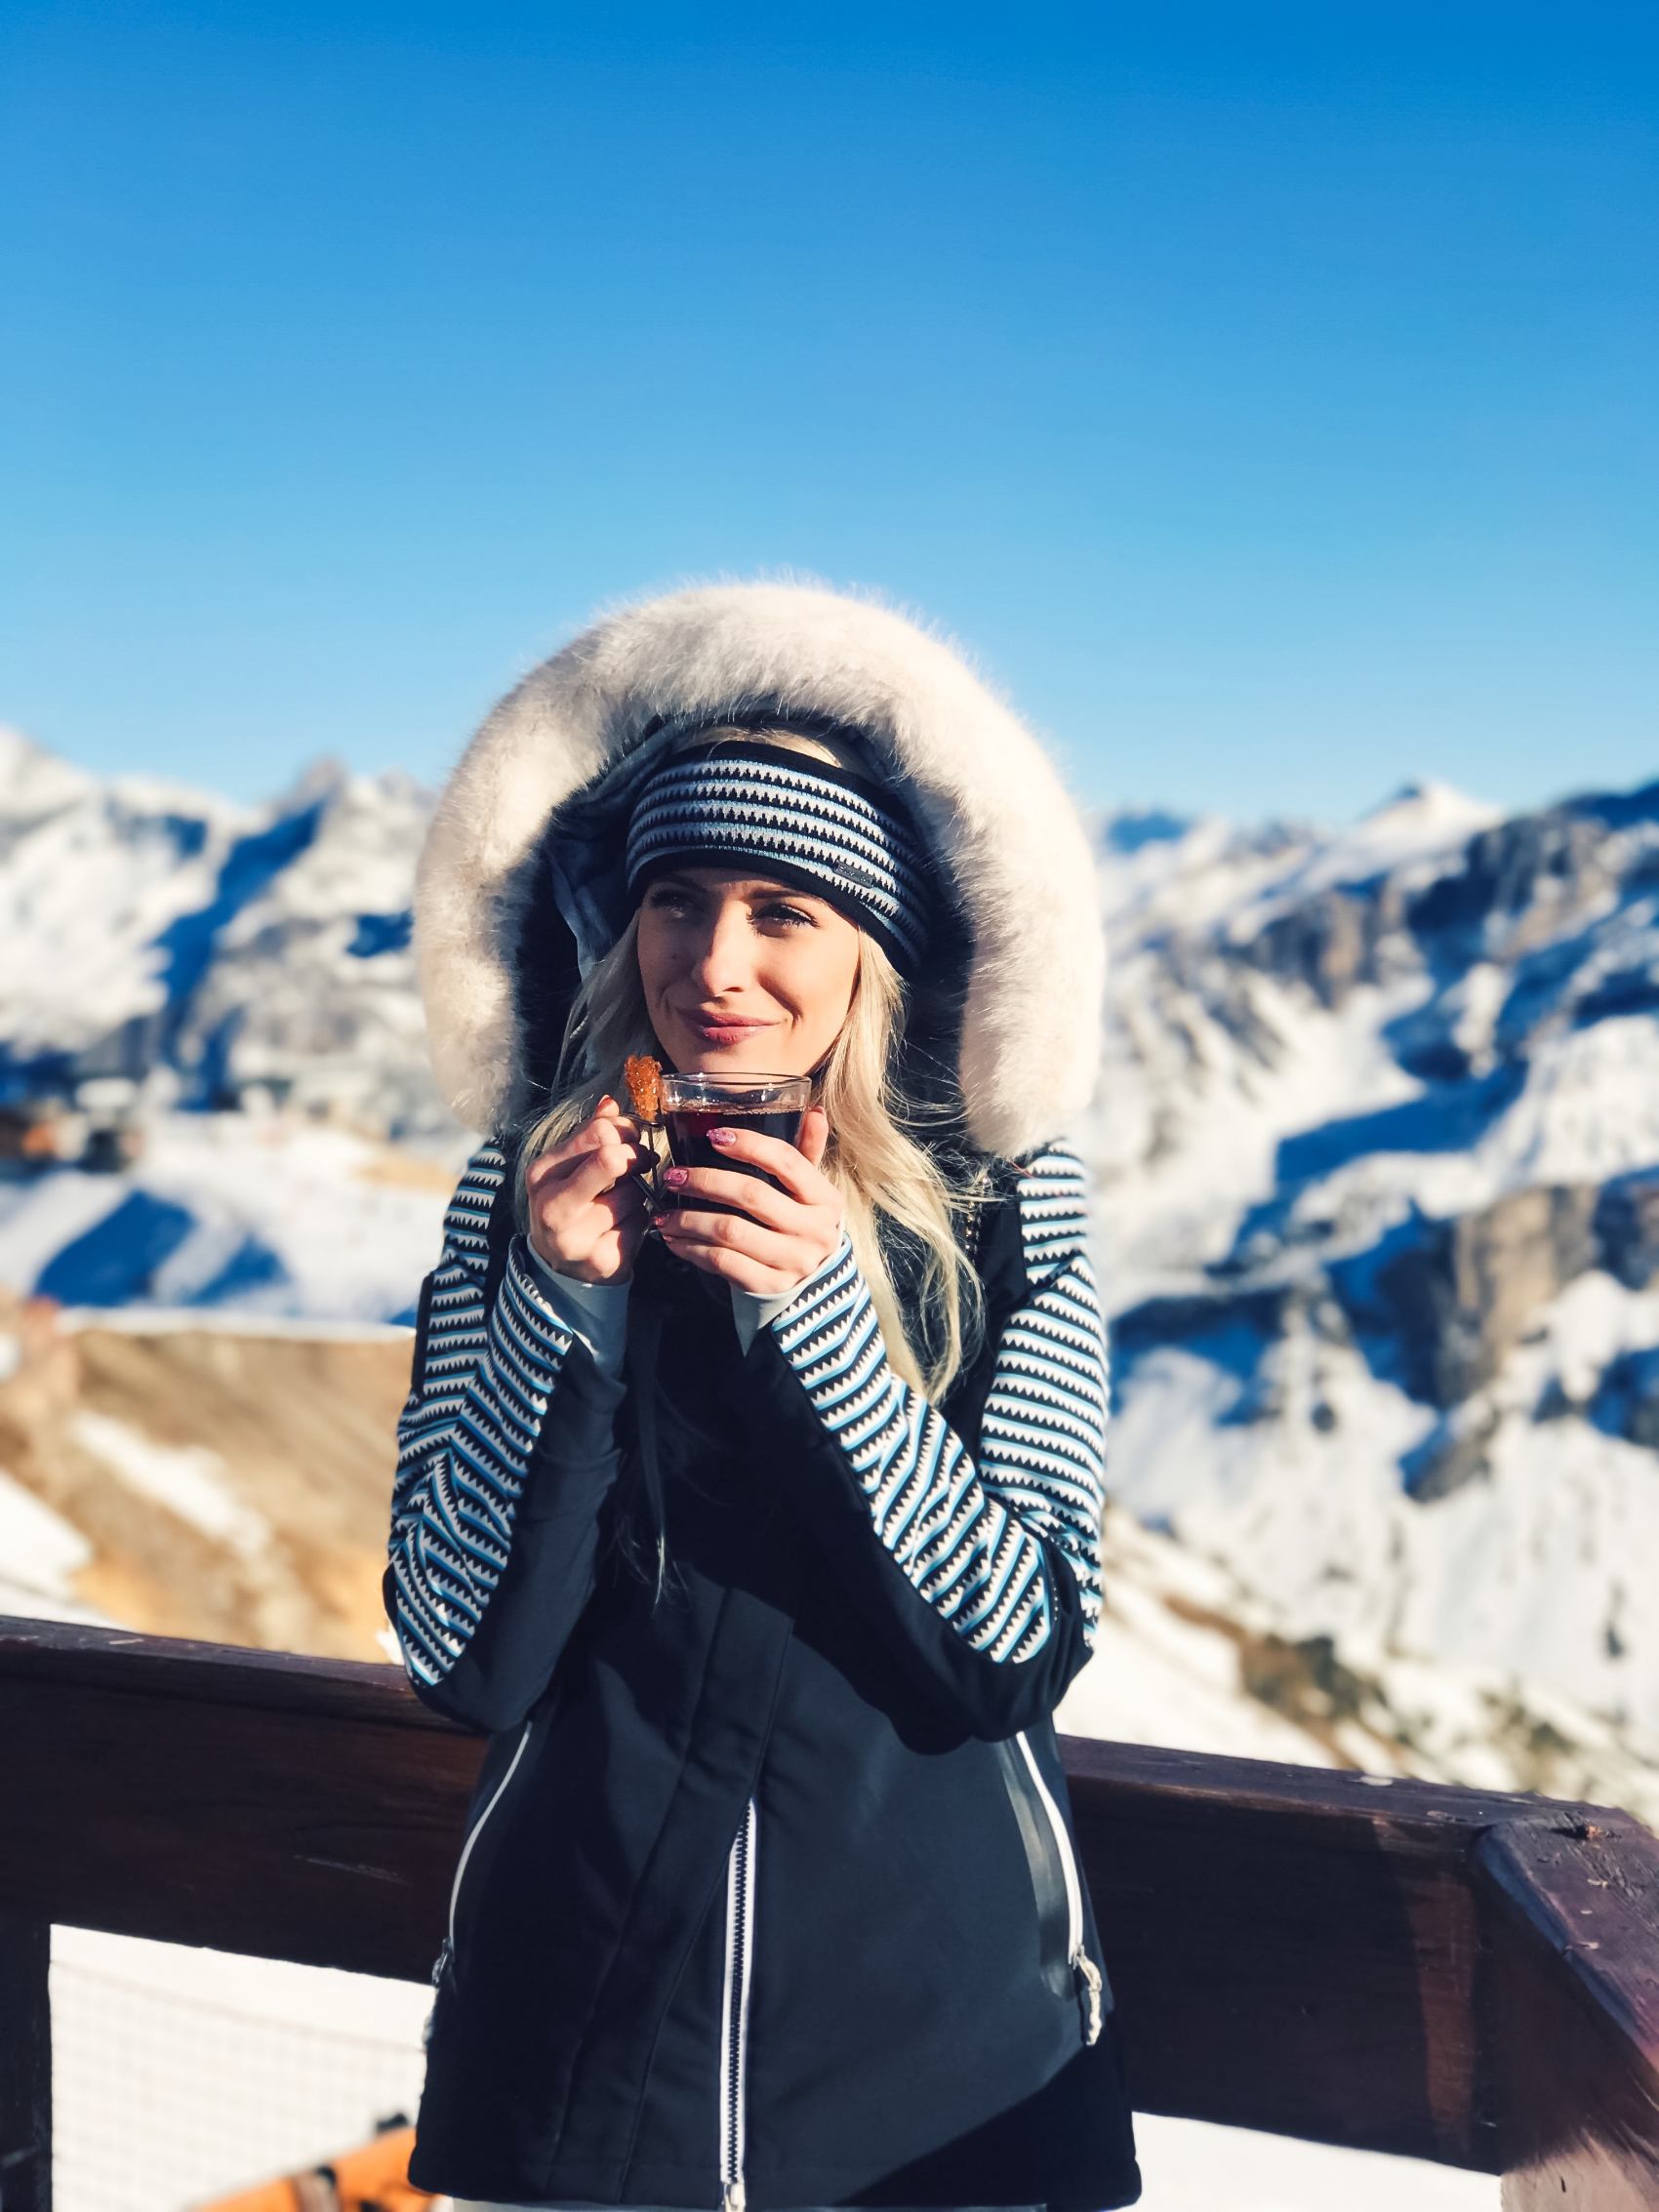 Skiwear Styles for the Slopes - Inthefrow